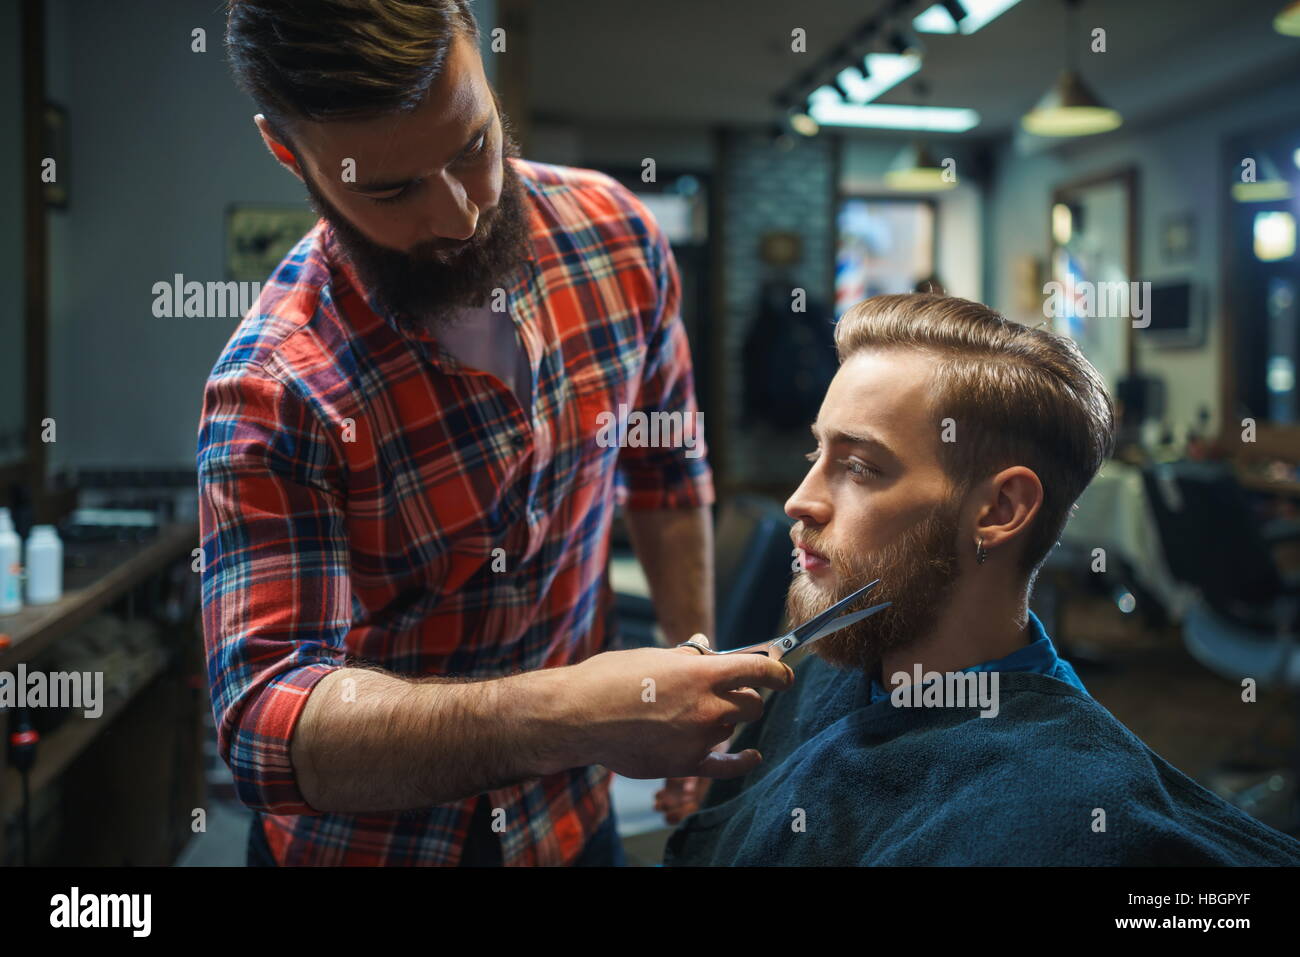 Customer in a barber shop Stock Photo - Alamy